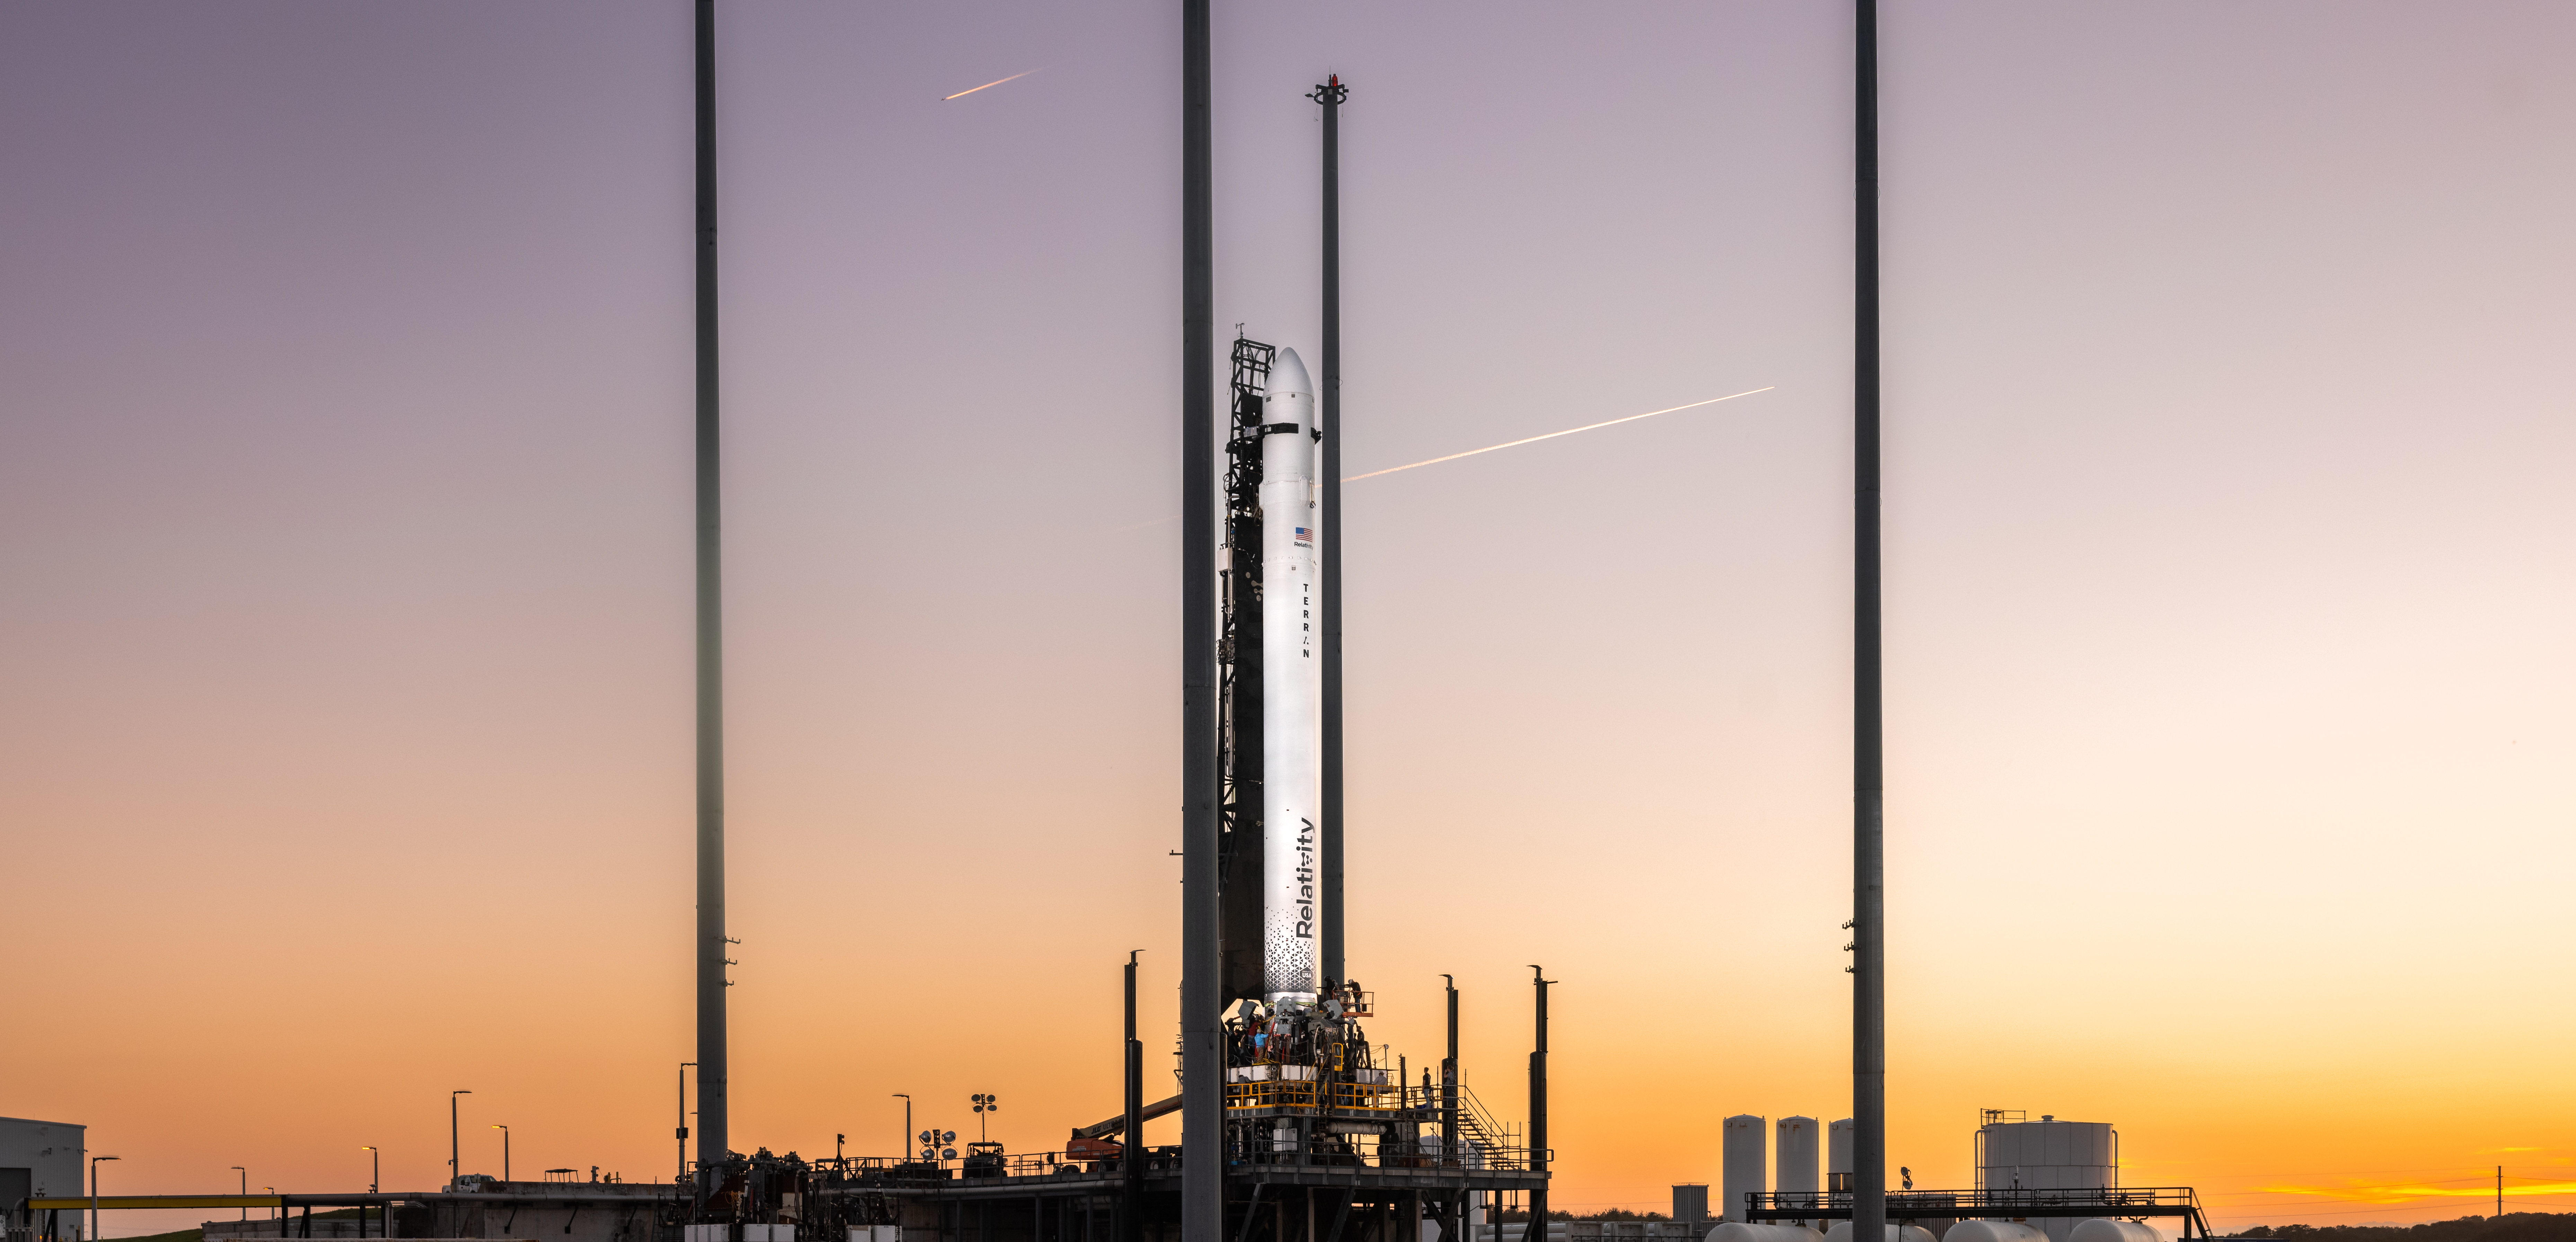 Watch Relativity Space launch world's 1st 3D-printed rocket tonight (March 22)